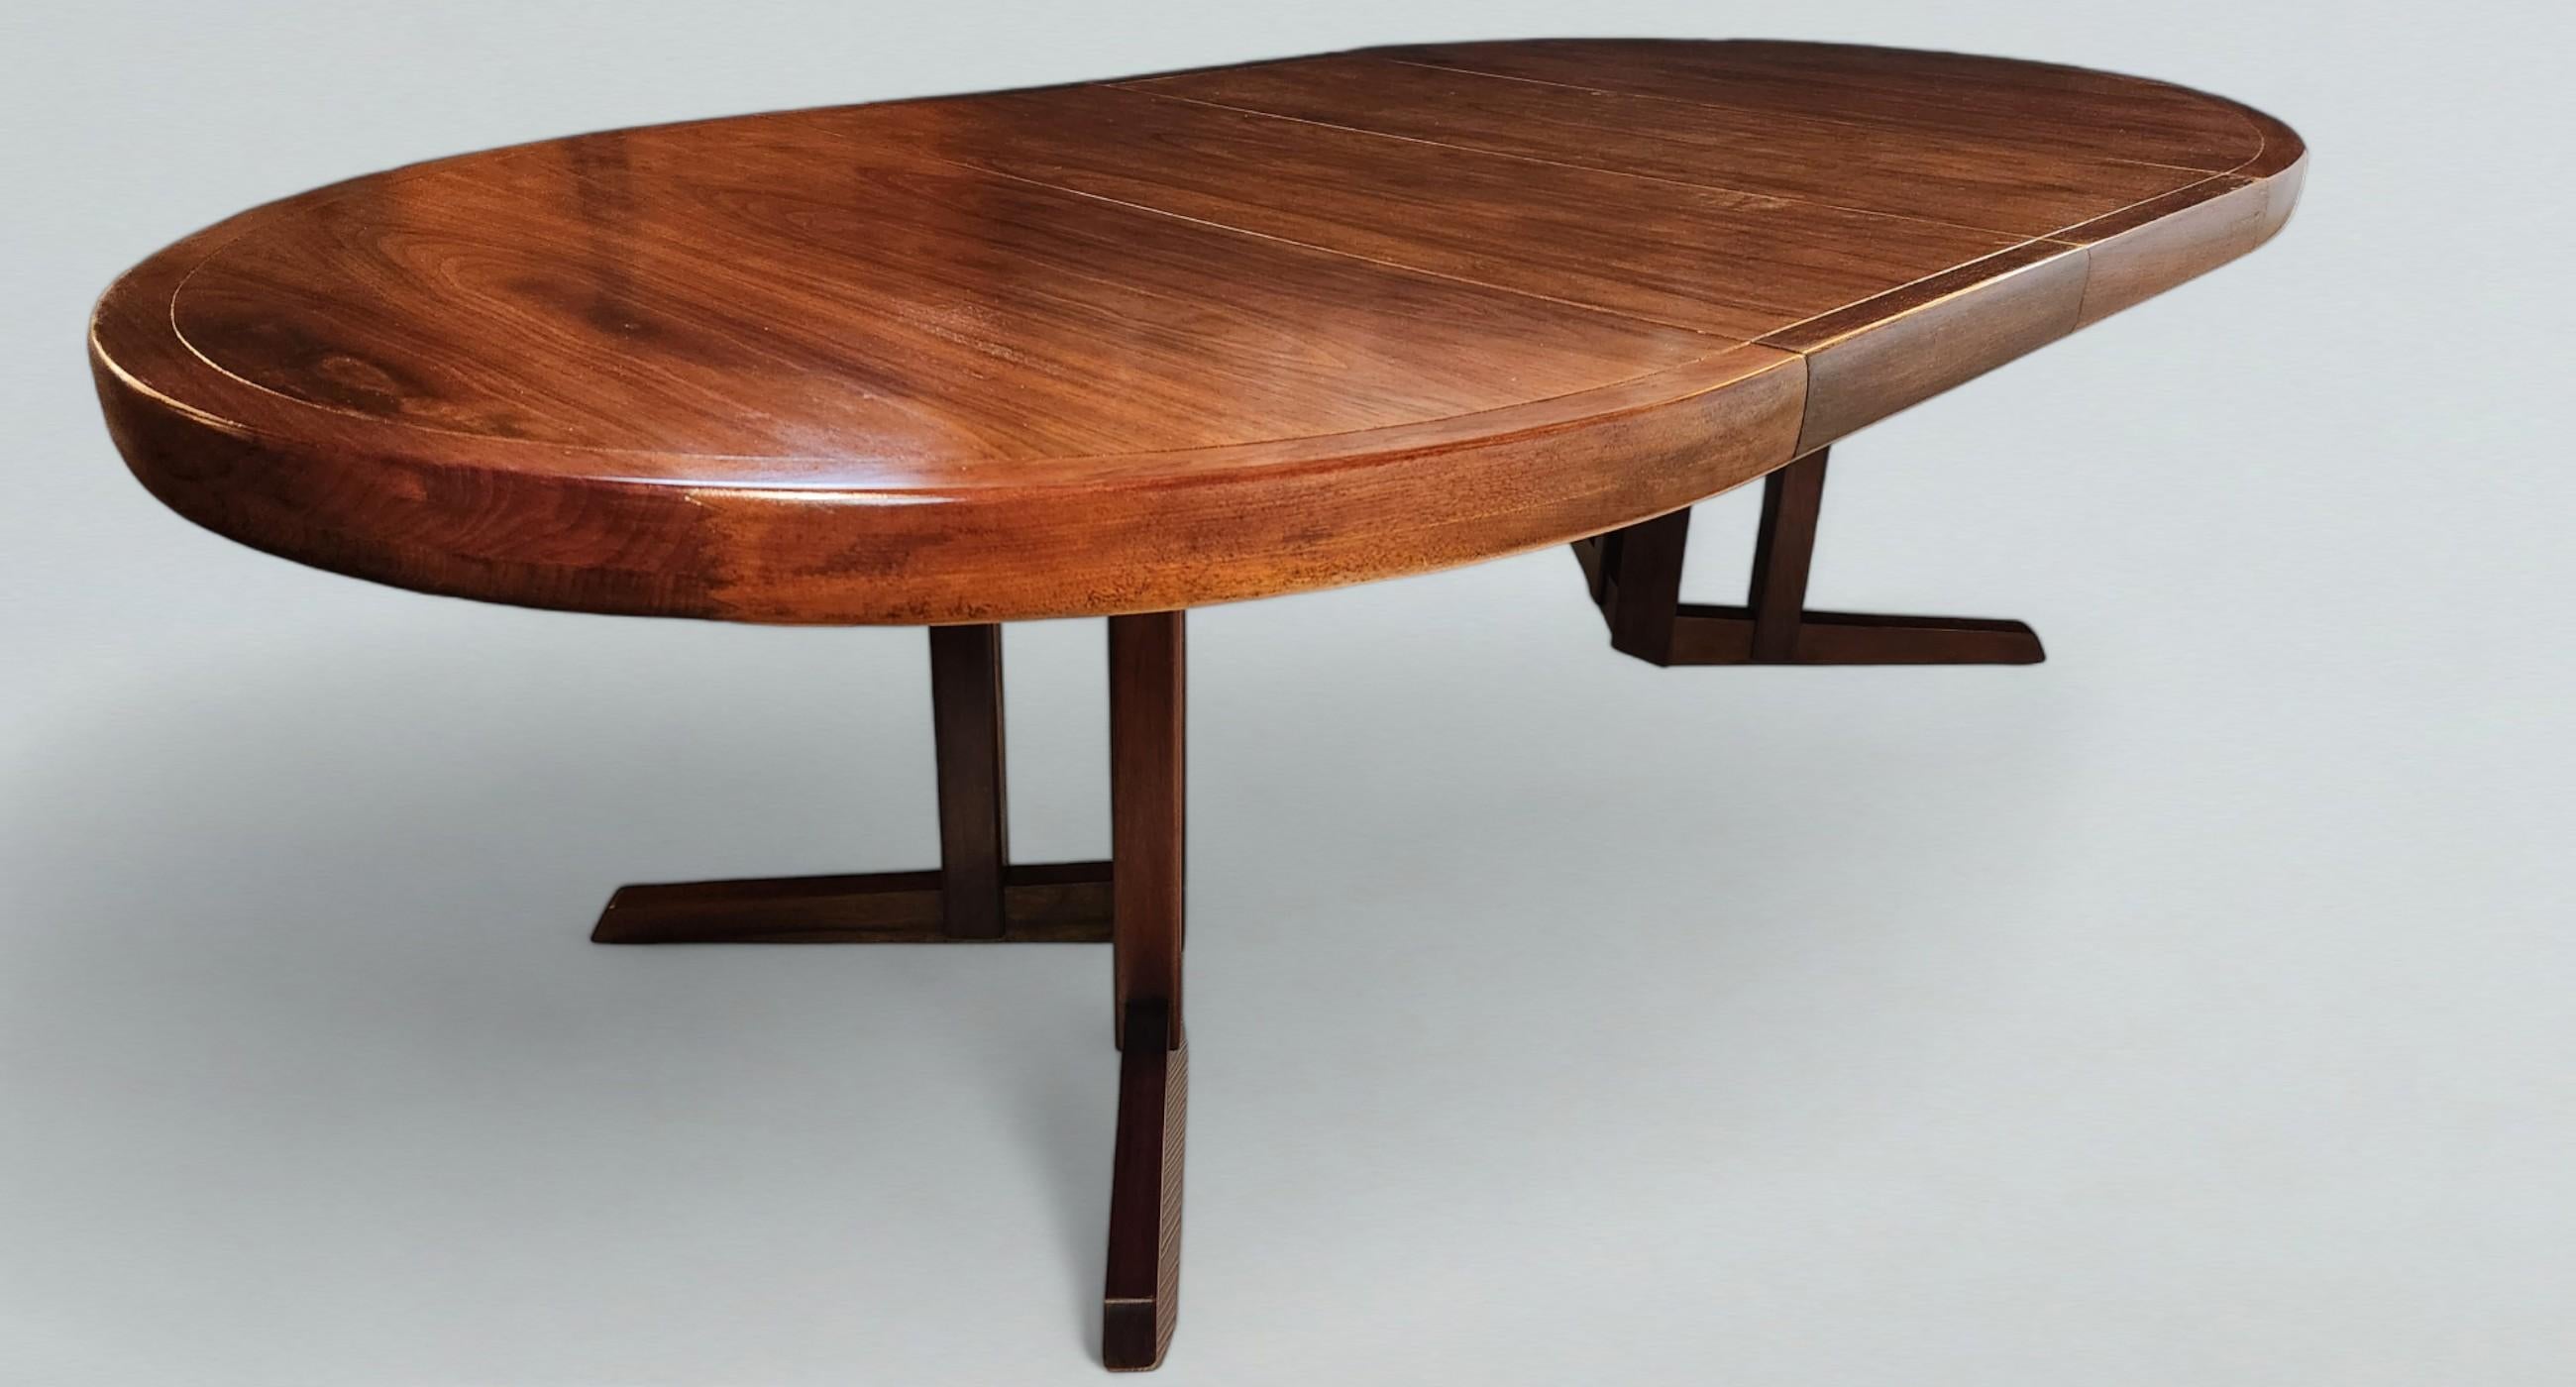 American George Nakashima Extendable Walnut Dining Table Model 277 for Widdicomb, 1959 For Sale